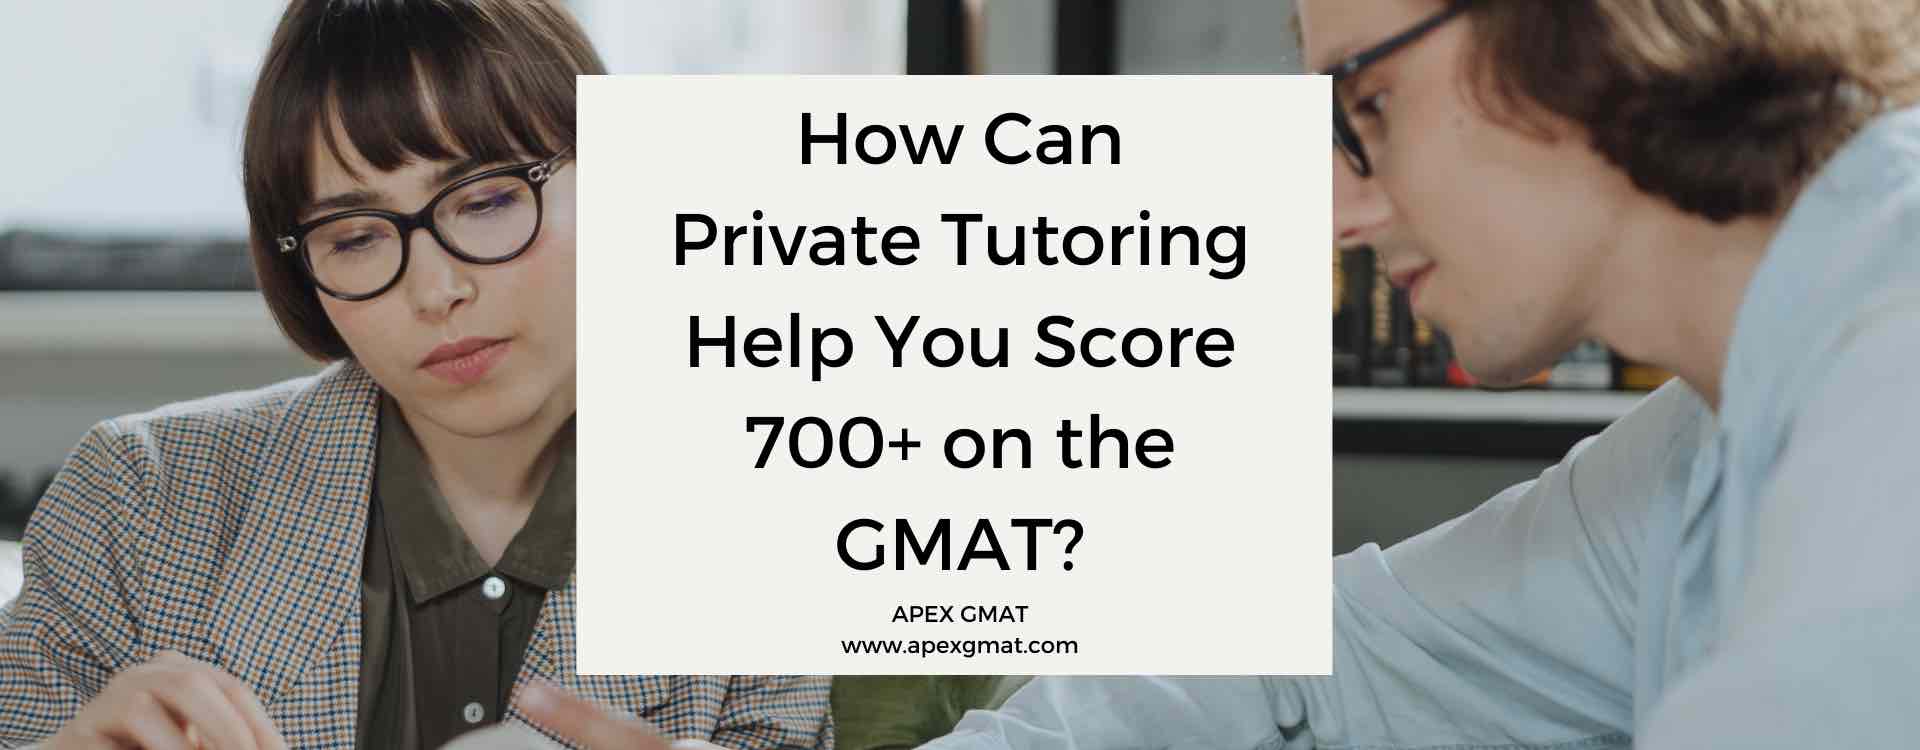 How Can Private Tutoring Help You Score 700+ on the GMAT?